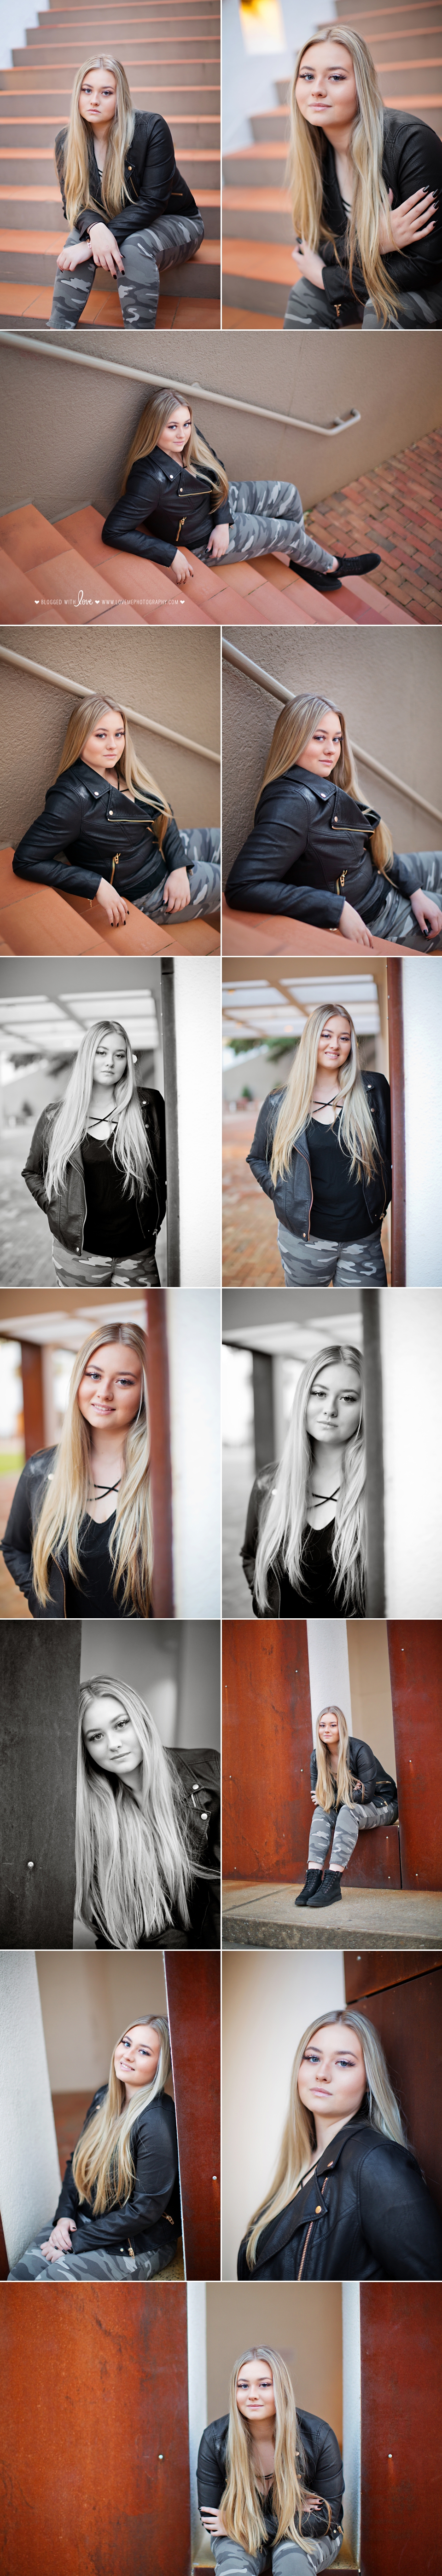 Girl posing in different positions with some black and white portraits